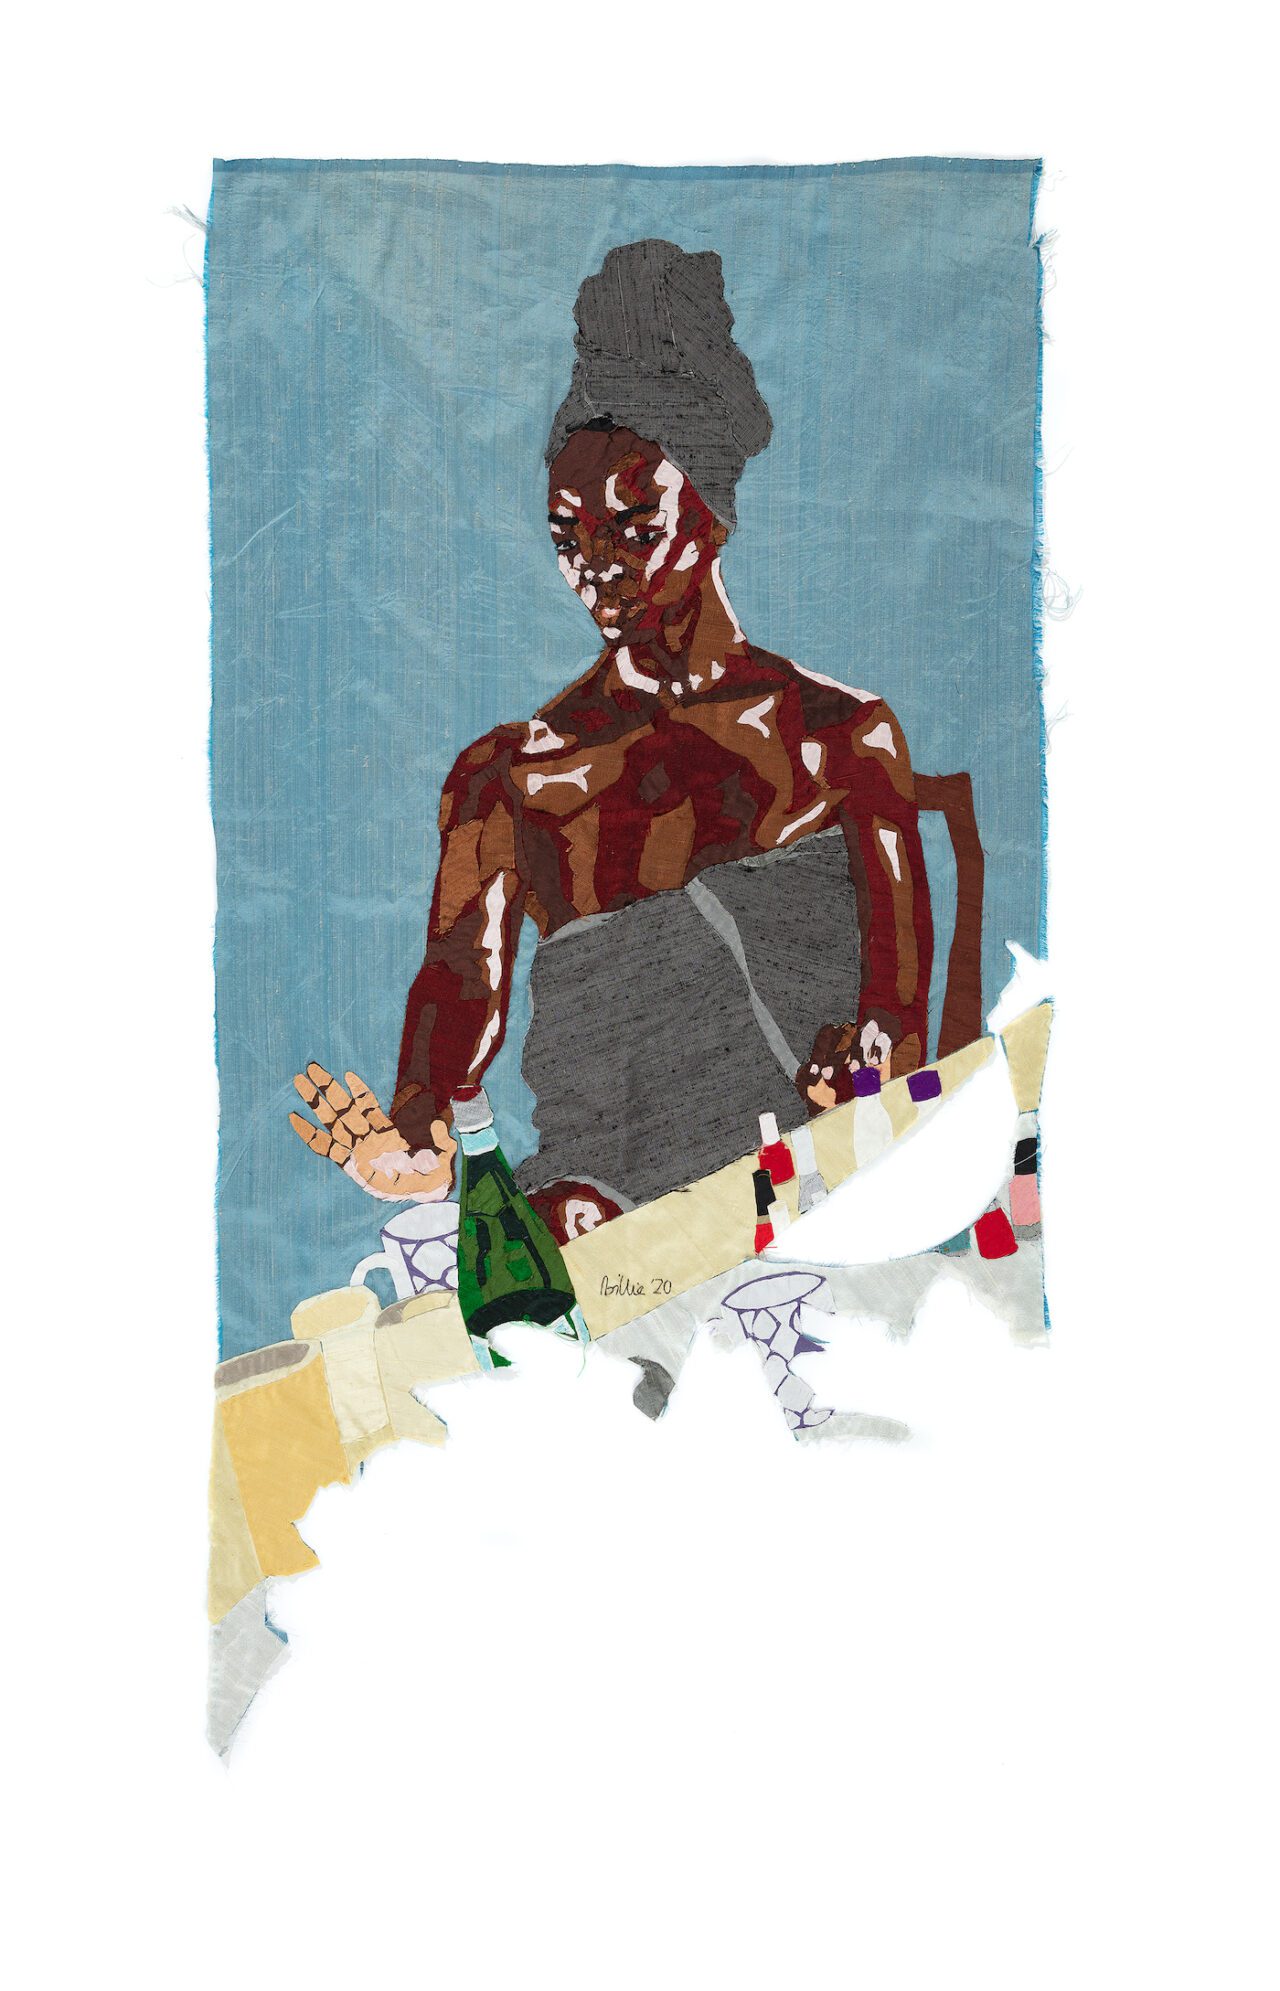 Billie Zangewa, Self-Care Sunday, 2020. Hand-stitched silk collage, 47.64 x 24.41 inches. Courtesy of Private Collection, Boston and Lehmann Maupin.